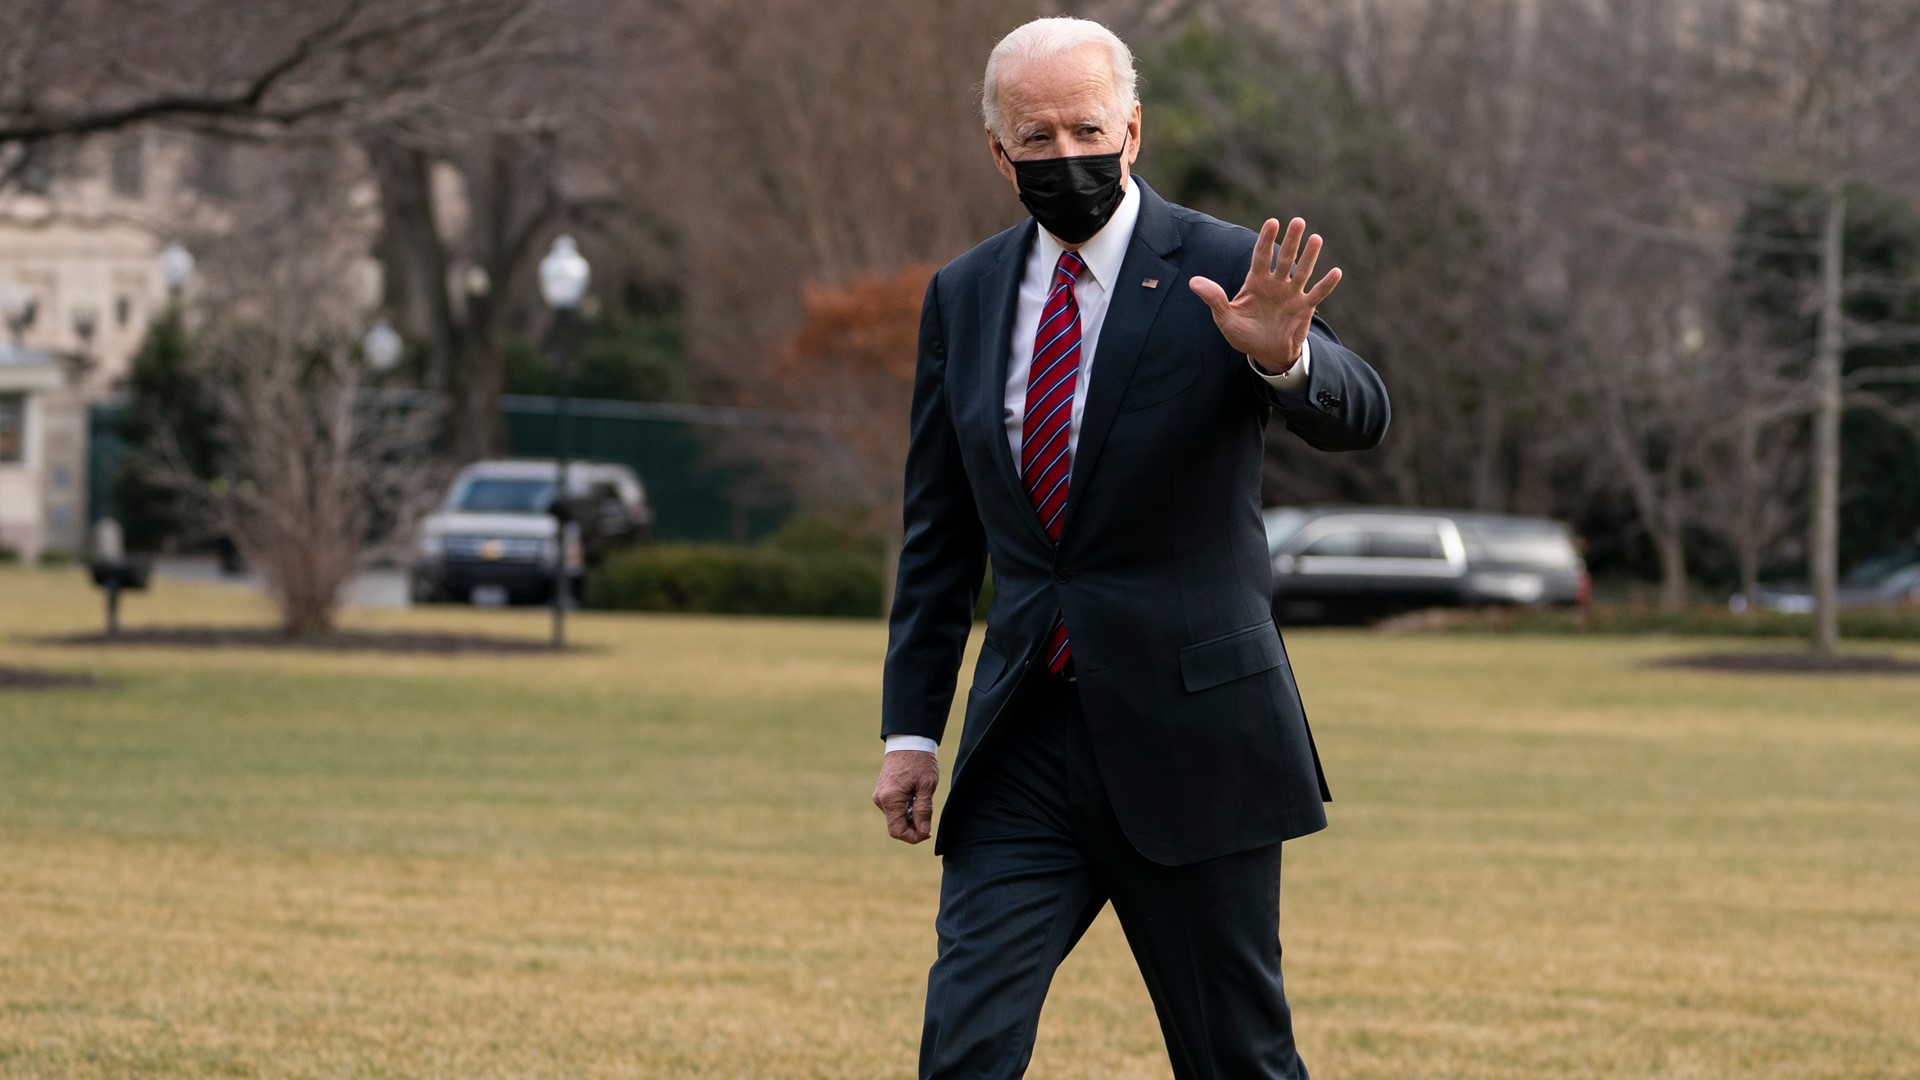 President Joe Biden said Republicans' counter-offer to his $1.9 trillion stimulus bill is too small to deal with the fallout of the coronavirus pandemic.